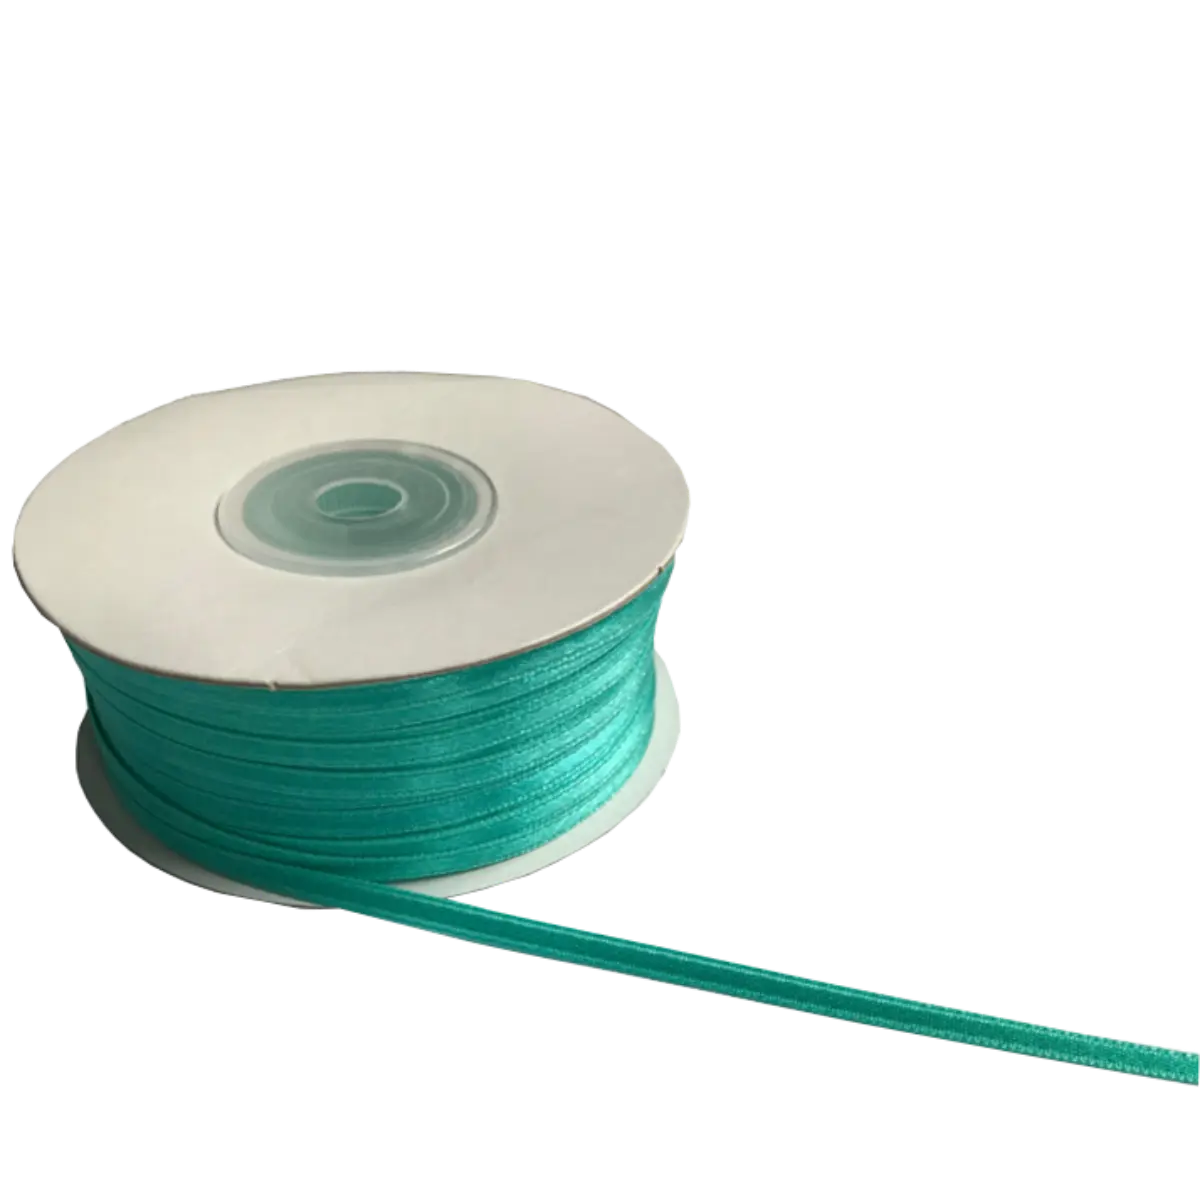 Cyan Double Sided Satin Ribbons - 3mm Wide By 100mts